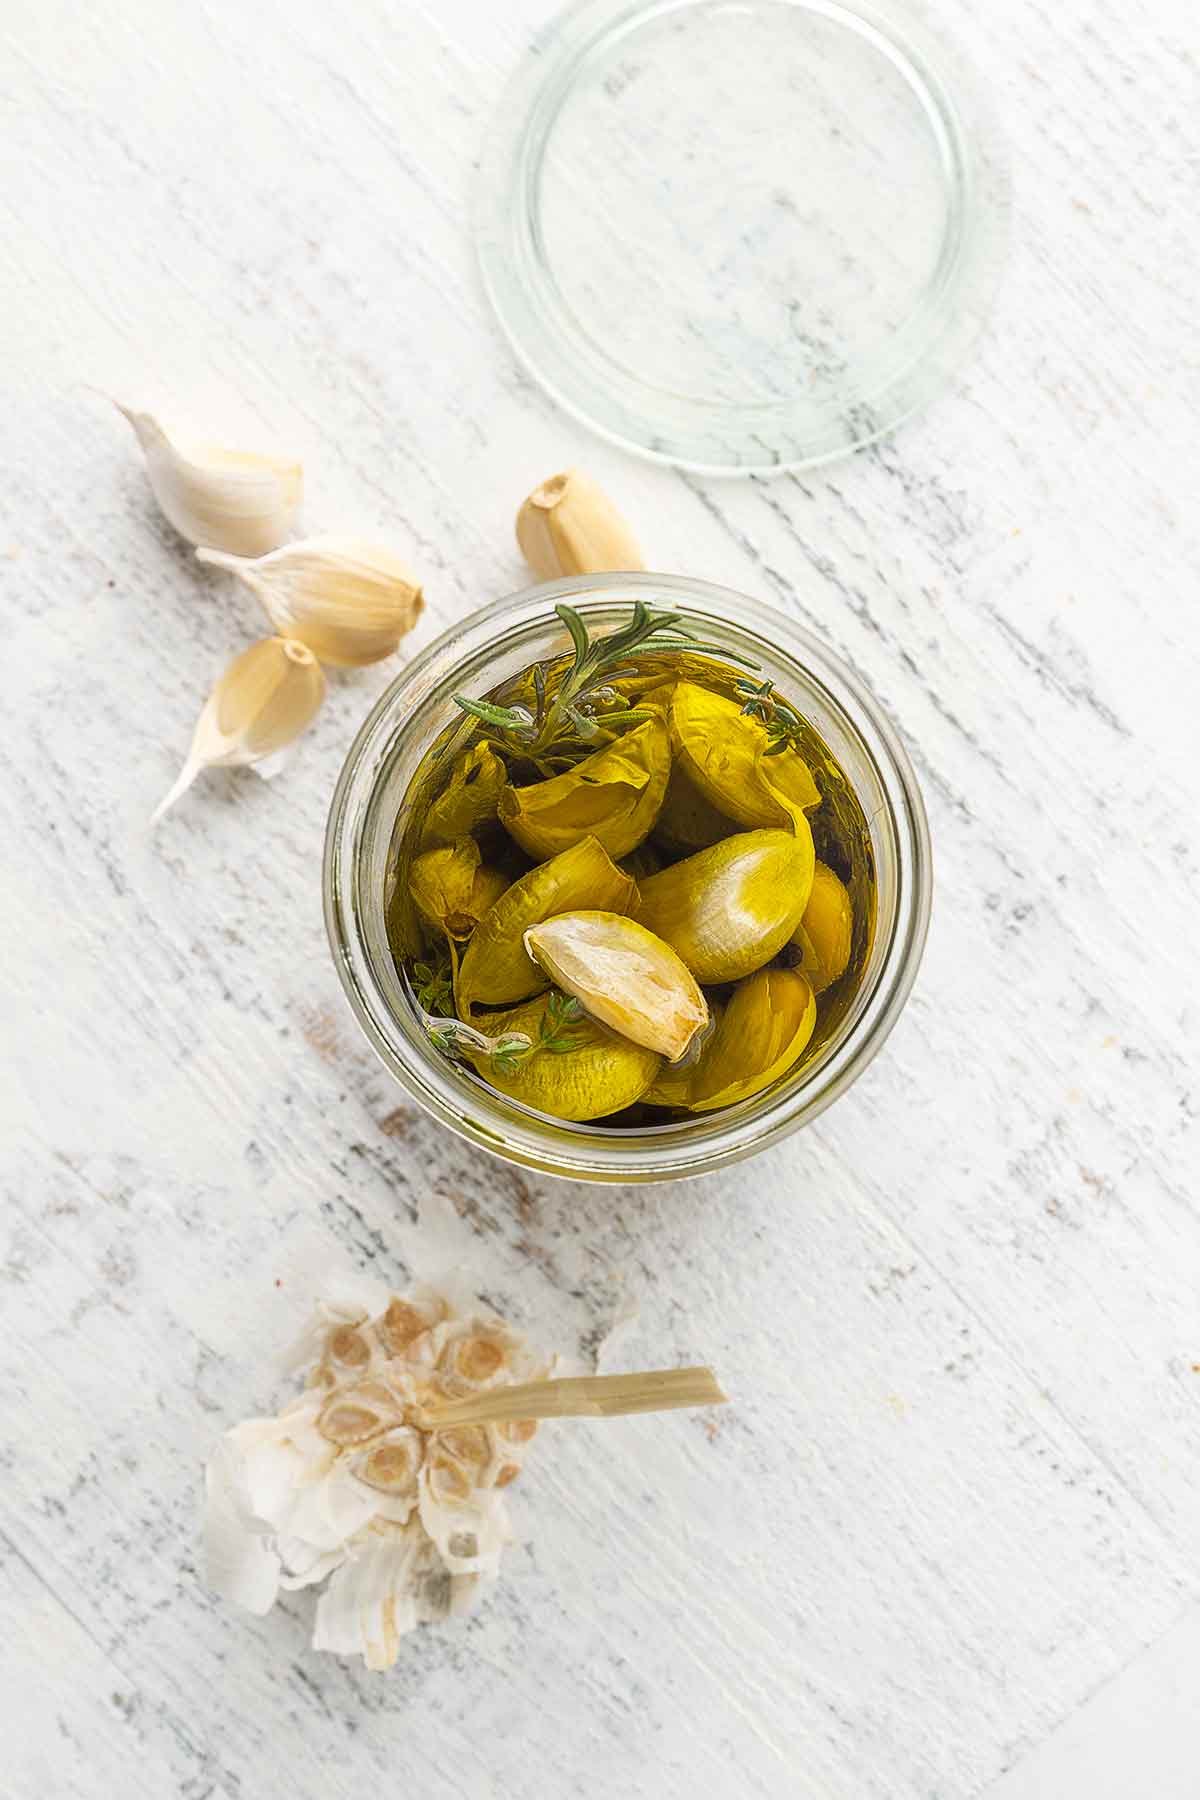 Garlic confit cloves in a jar of oil with some loose cloves nearby.